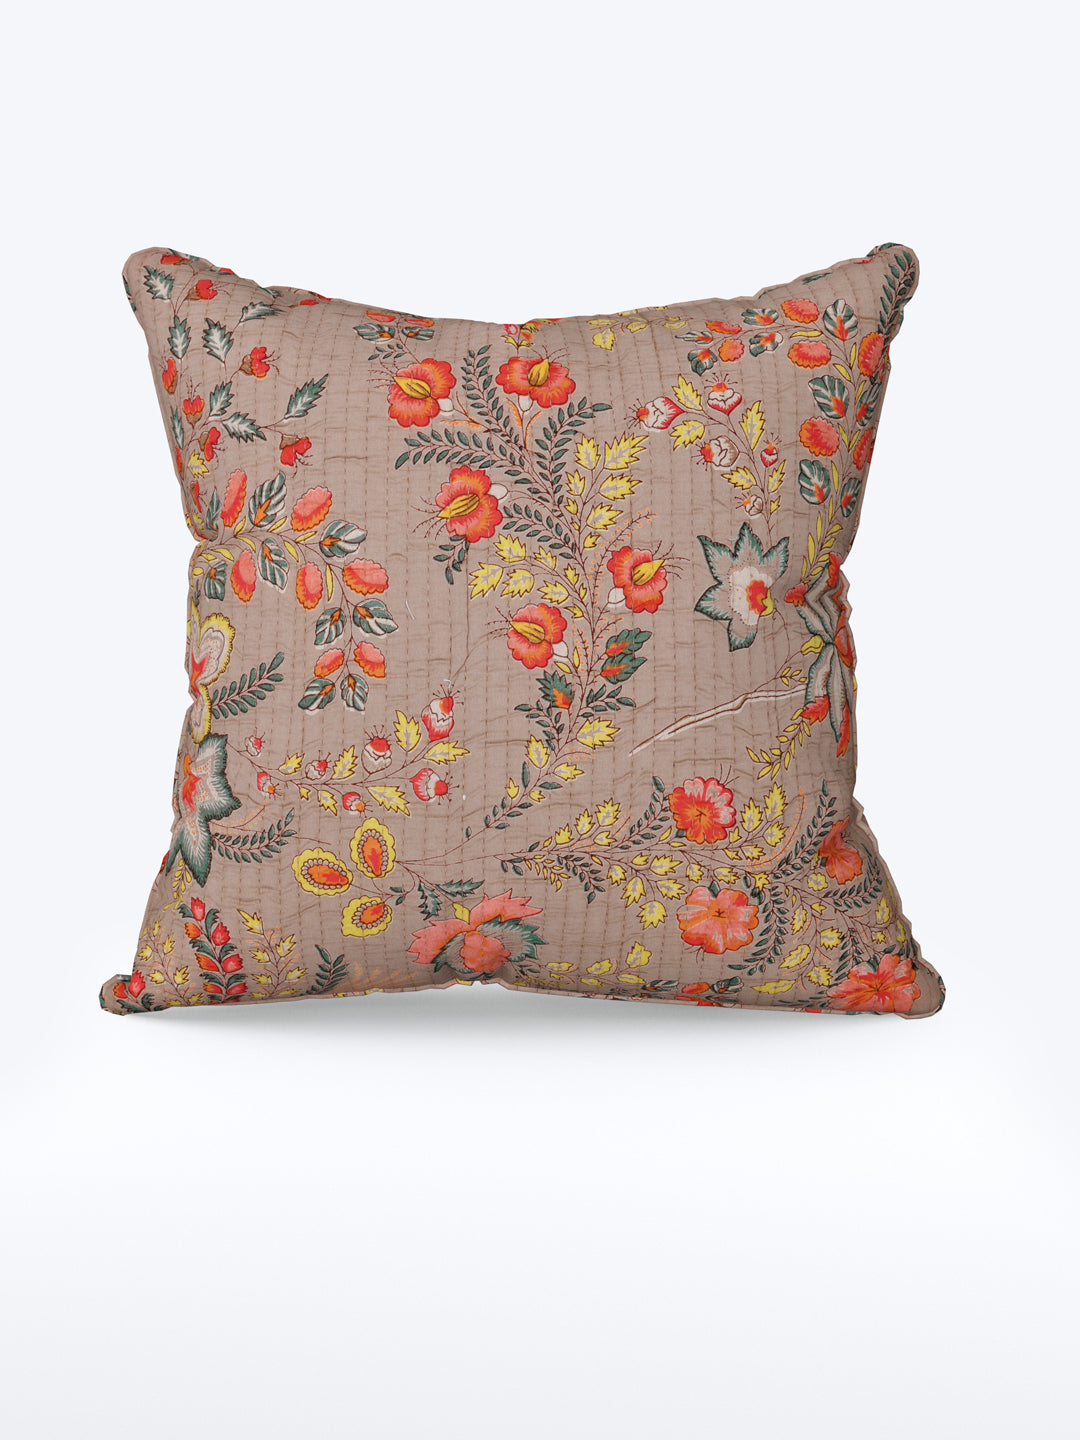 Cotton Cushion Covers; 16x16 Inches; Set of 5; Orange Flowers